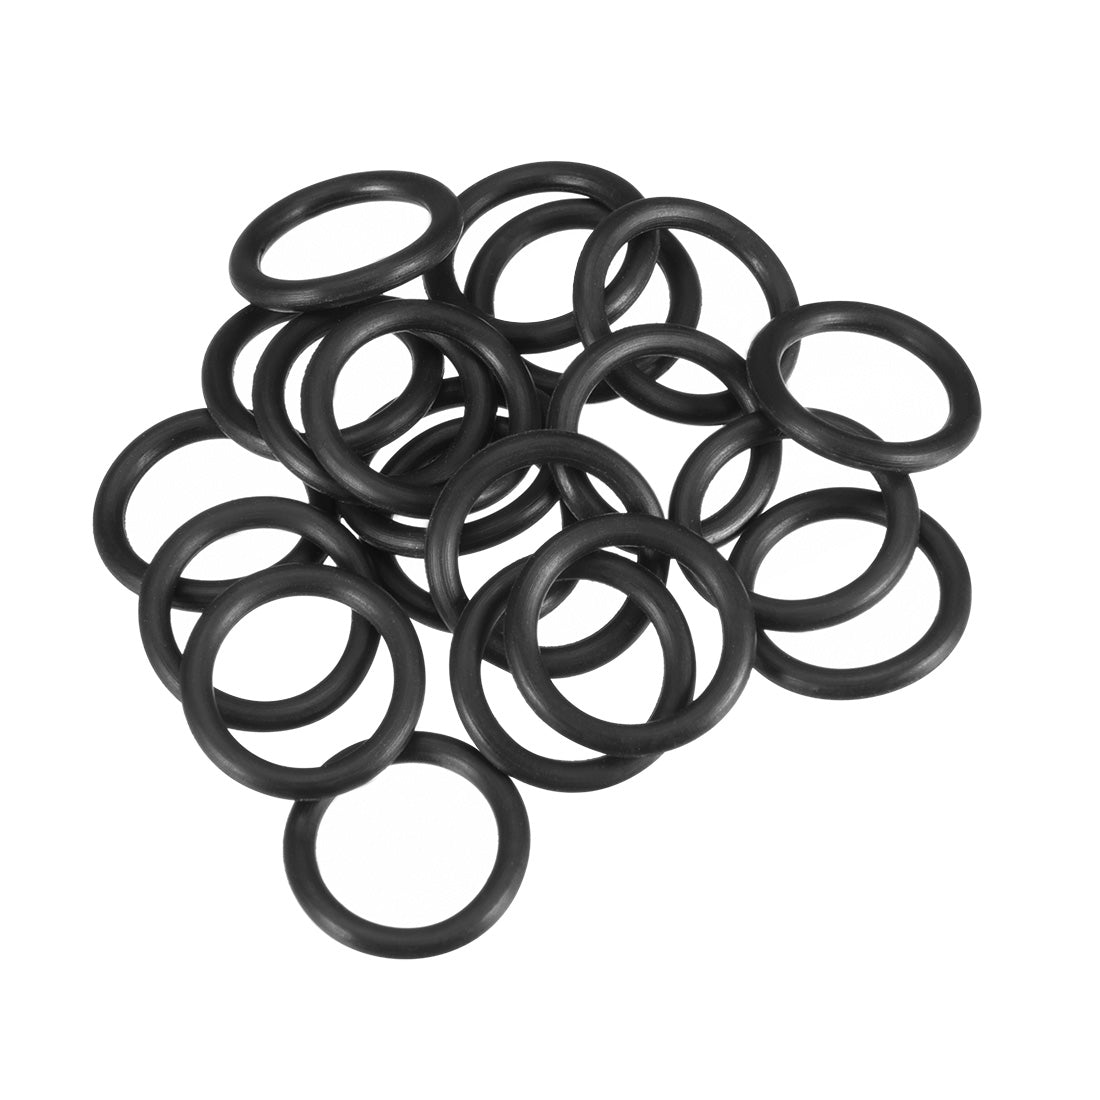 uxcell Uxcell O-Rings Nitrile Rubber 10mm x 14mm x 2mm Seal Rings Sealing Gasket 20pcs